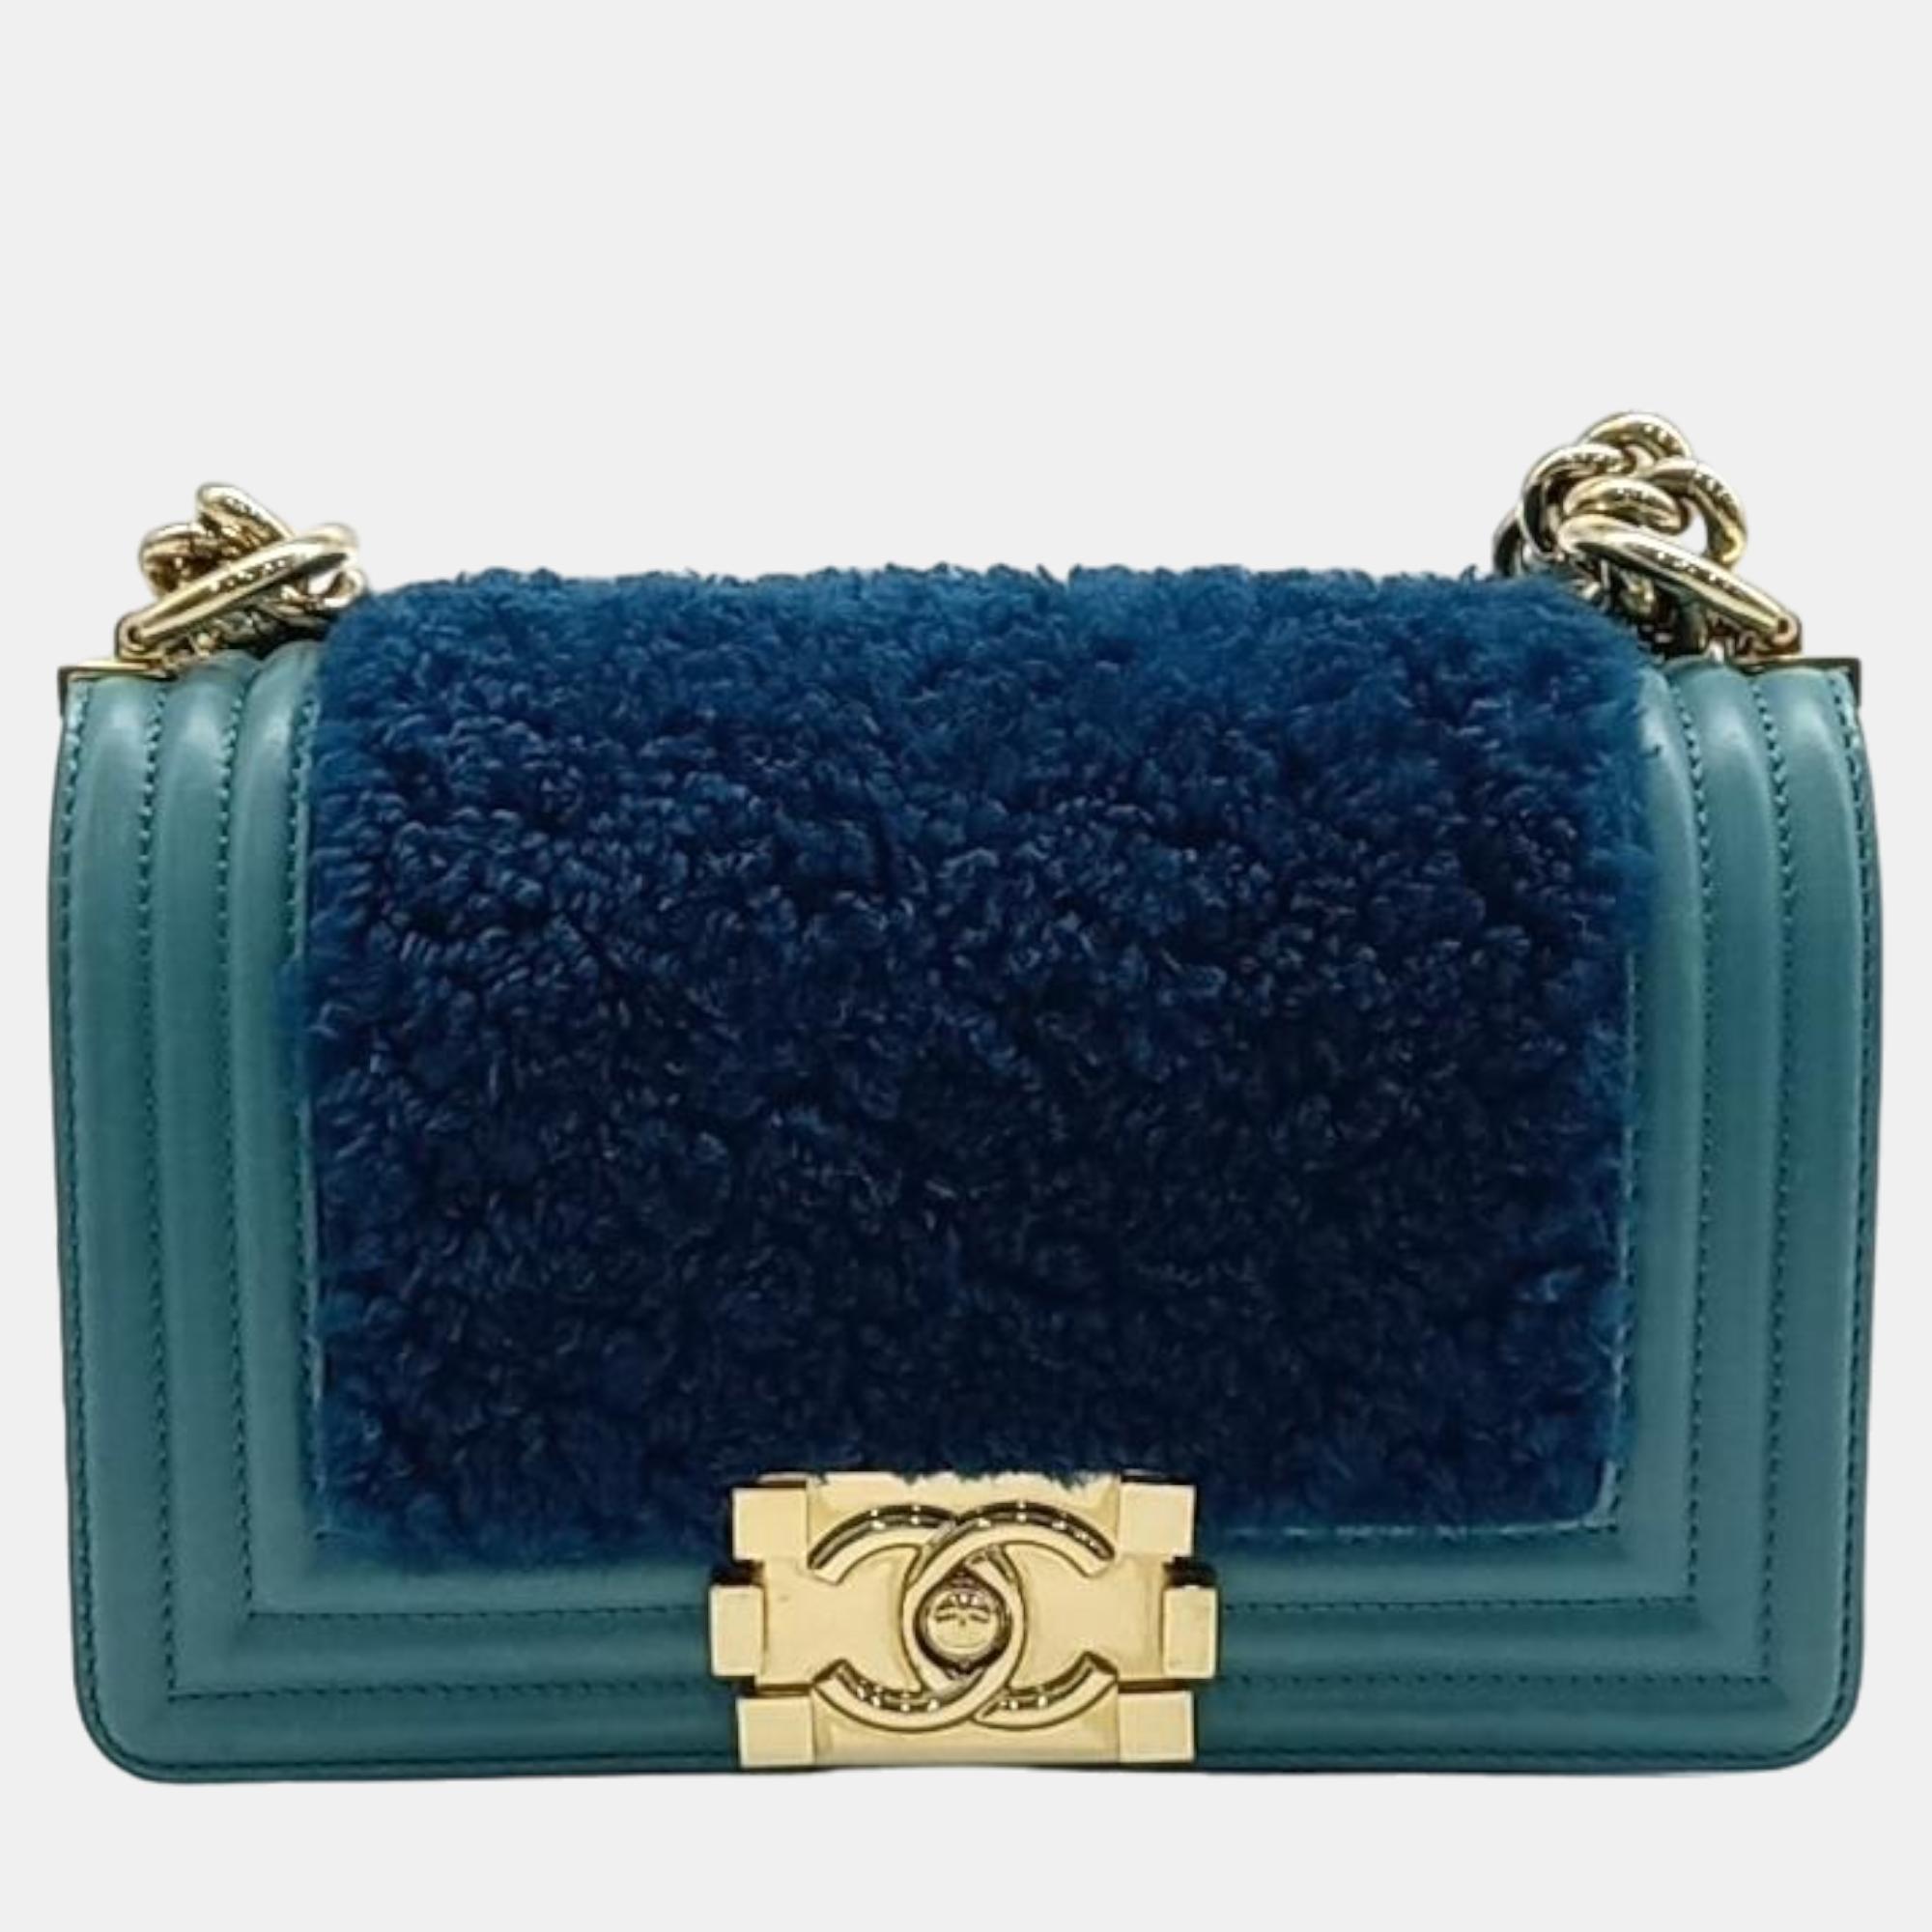 Chanel green and blue leather and shearling boy bag mini